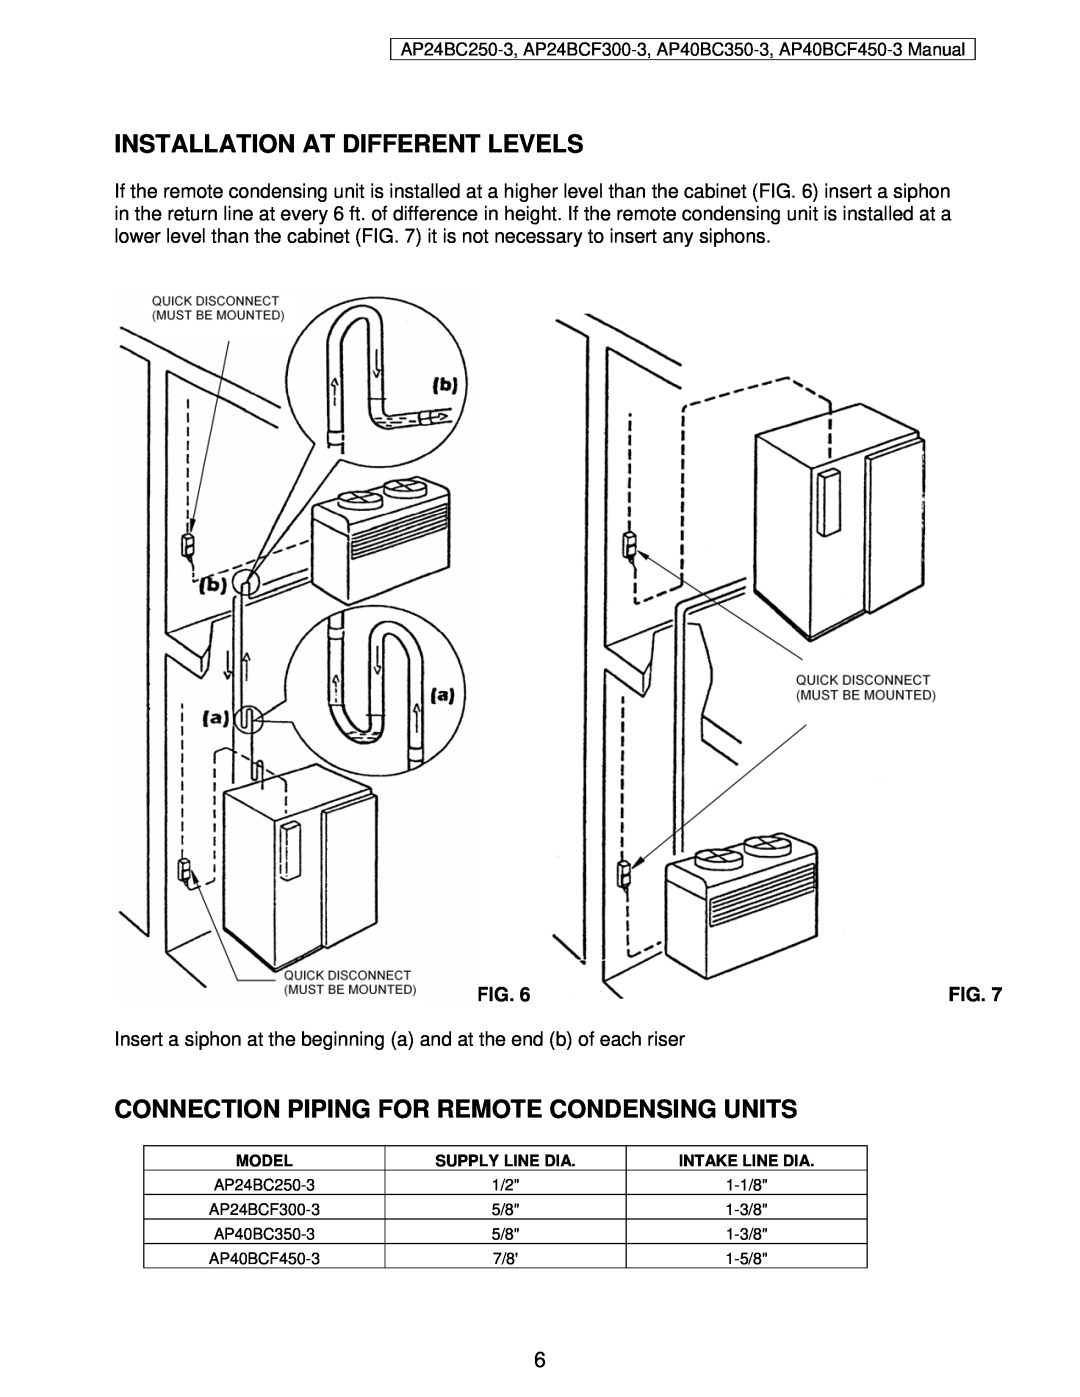 American Panel AP24BC250-3 user manual Installation At Different Levels, Connection Piping For Remote Condensing Units 